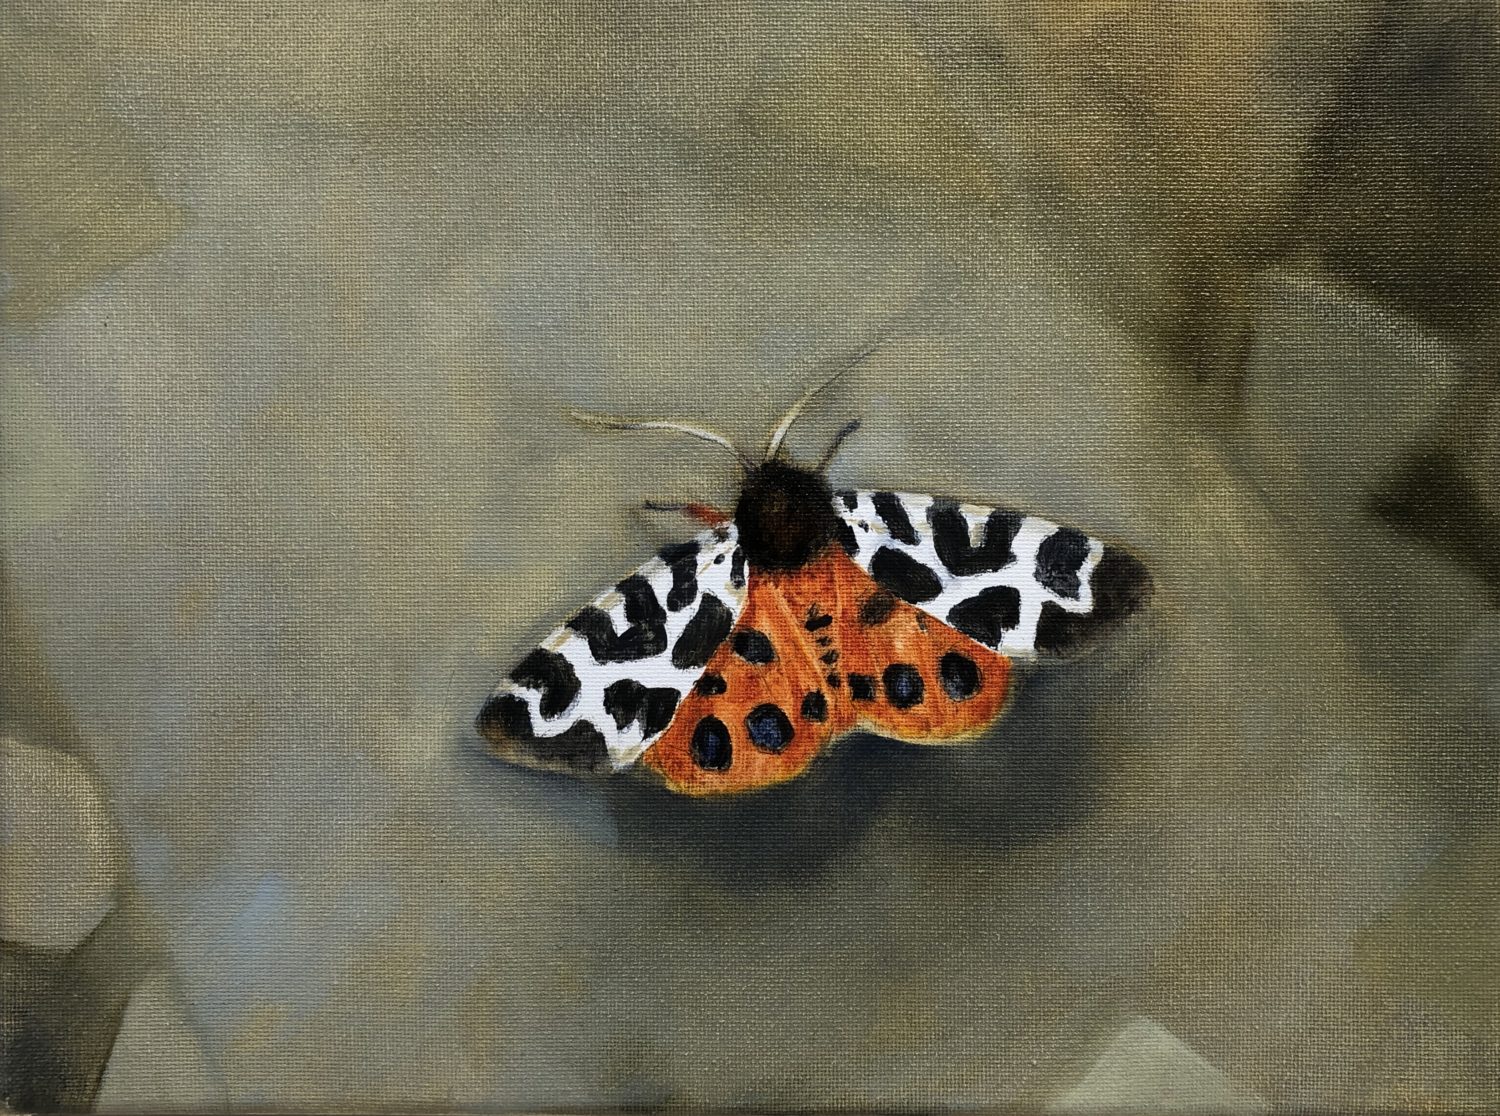 Garden Tiger Moth by Beatrice O'Connell